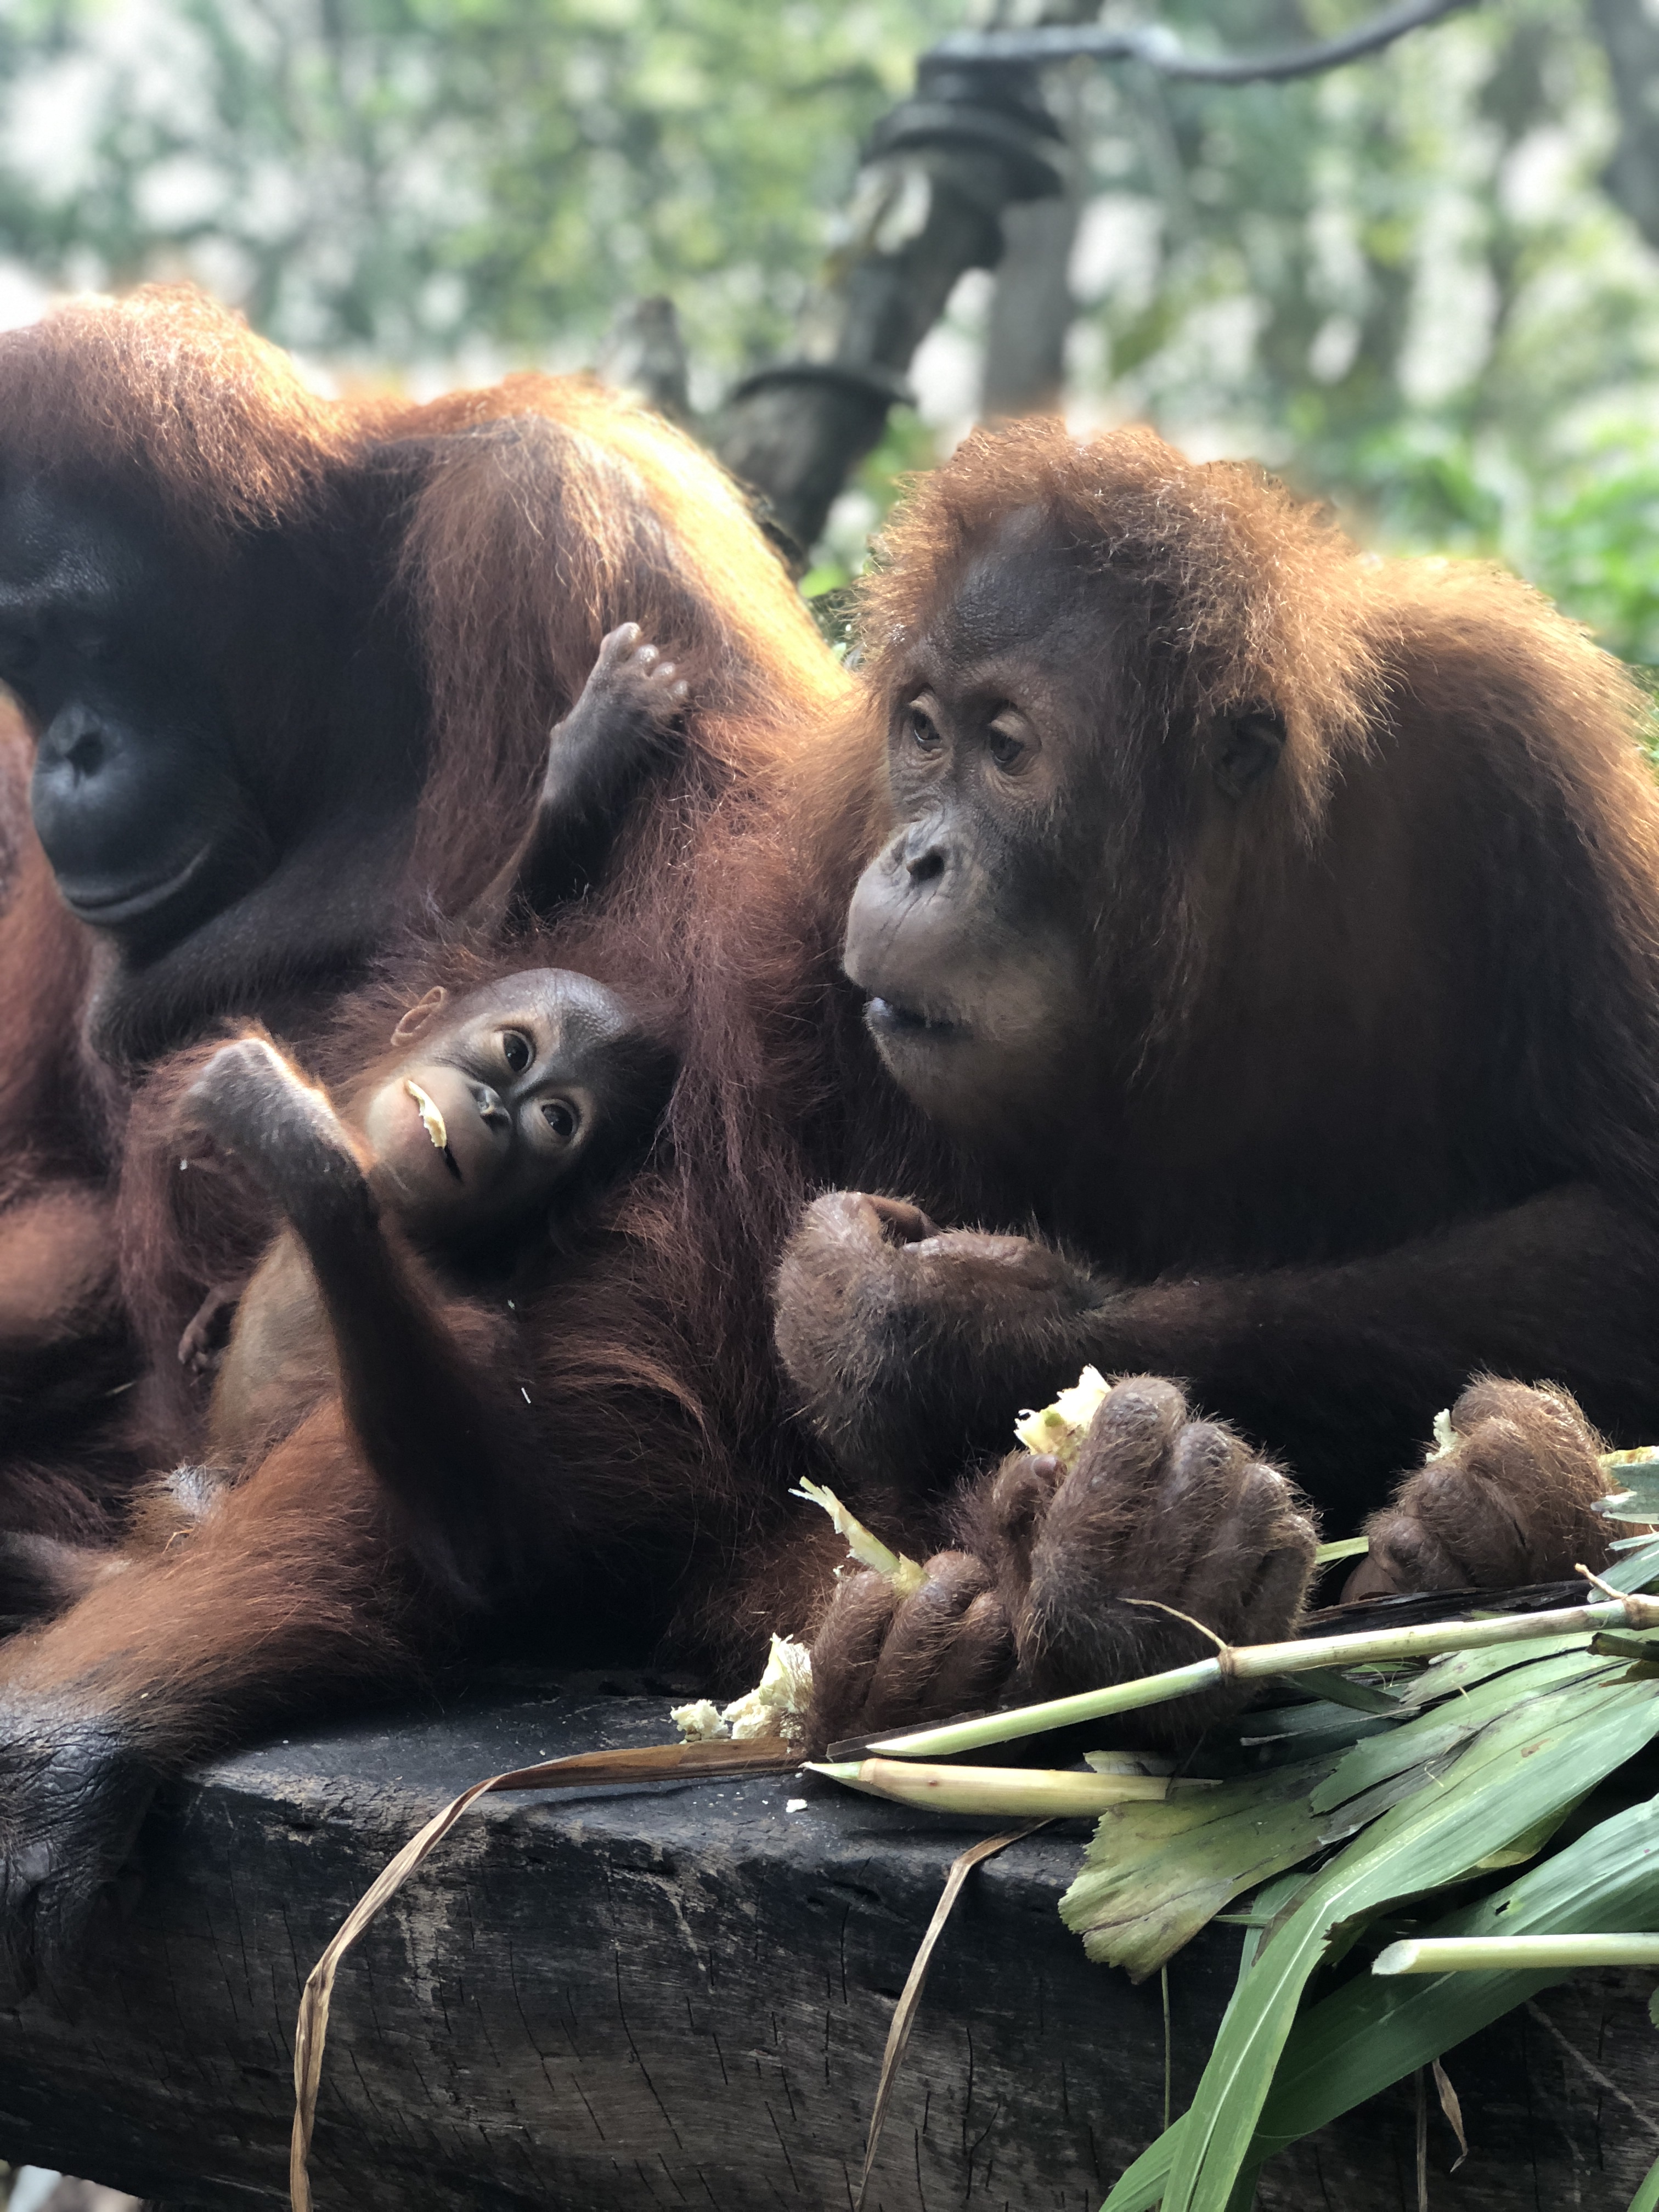 Breakfast with the Orangutans at the Singapore Zoo